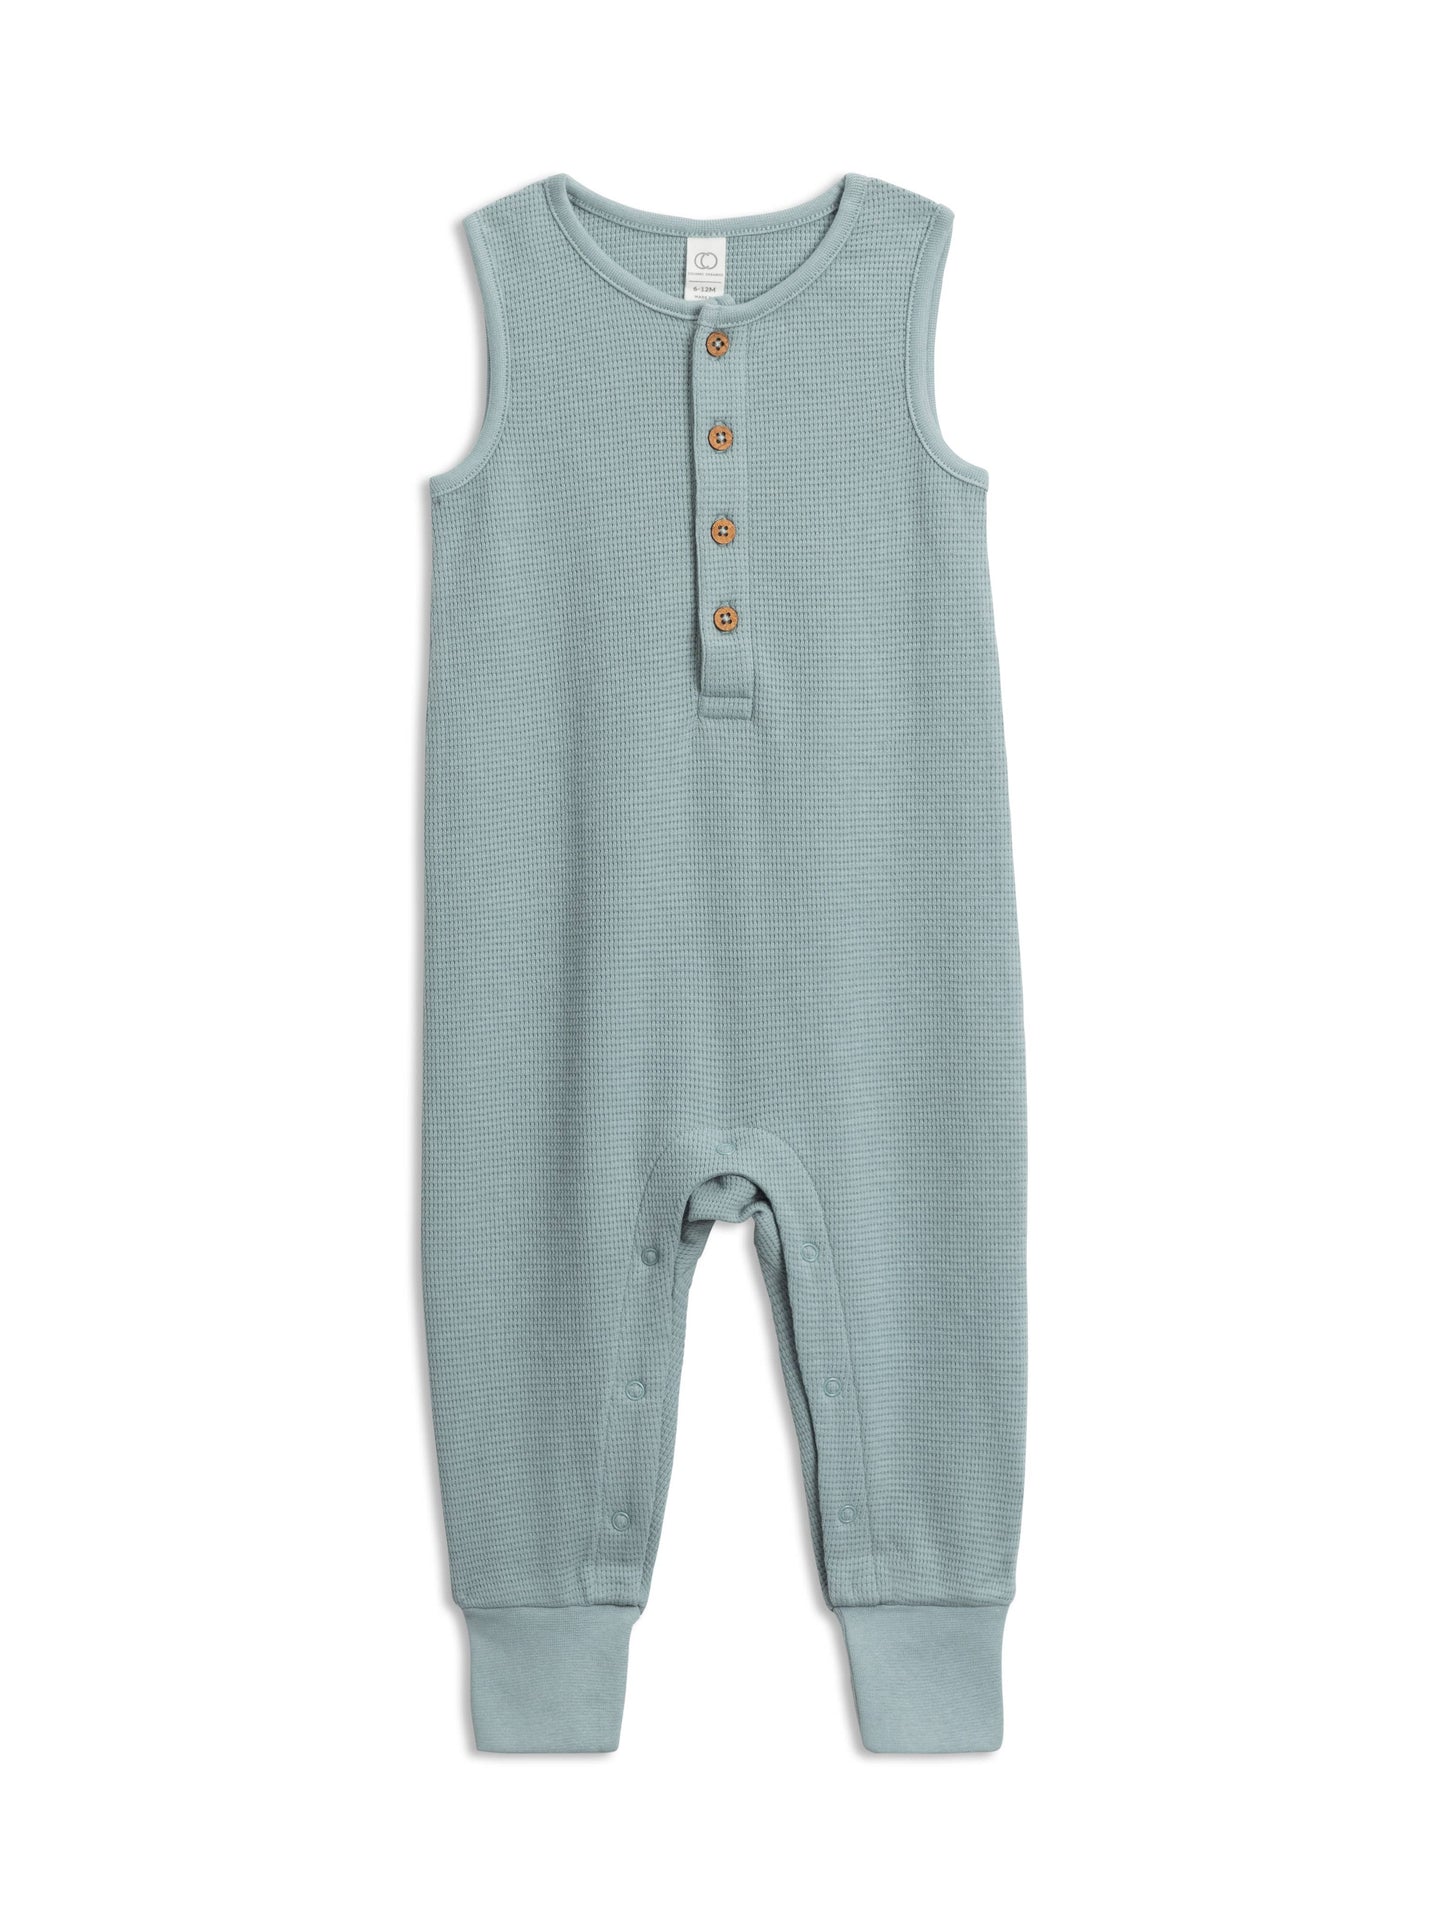 Our Wade Romper is made from 100% organic waffled cotton, and has eco-friendly coconut buttons and nickel-free snaps to make getting dressed effortless. Made of 100%